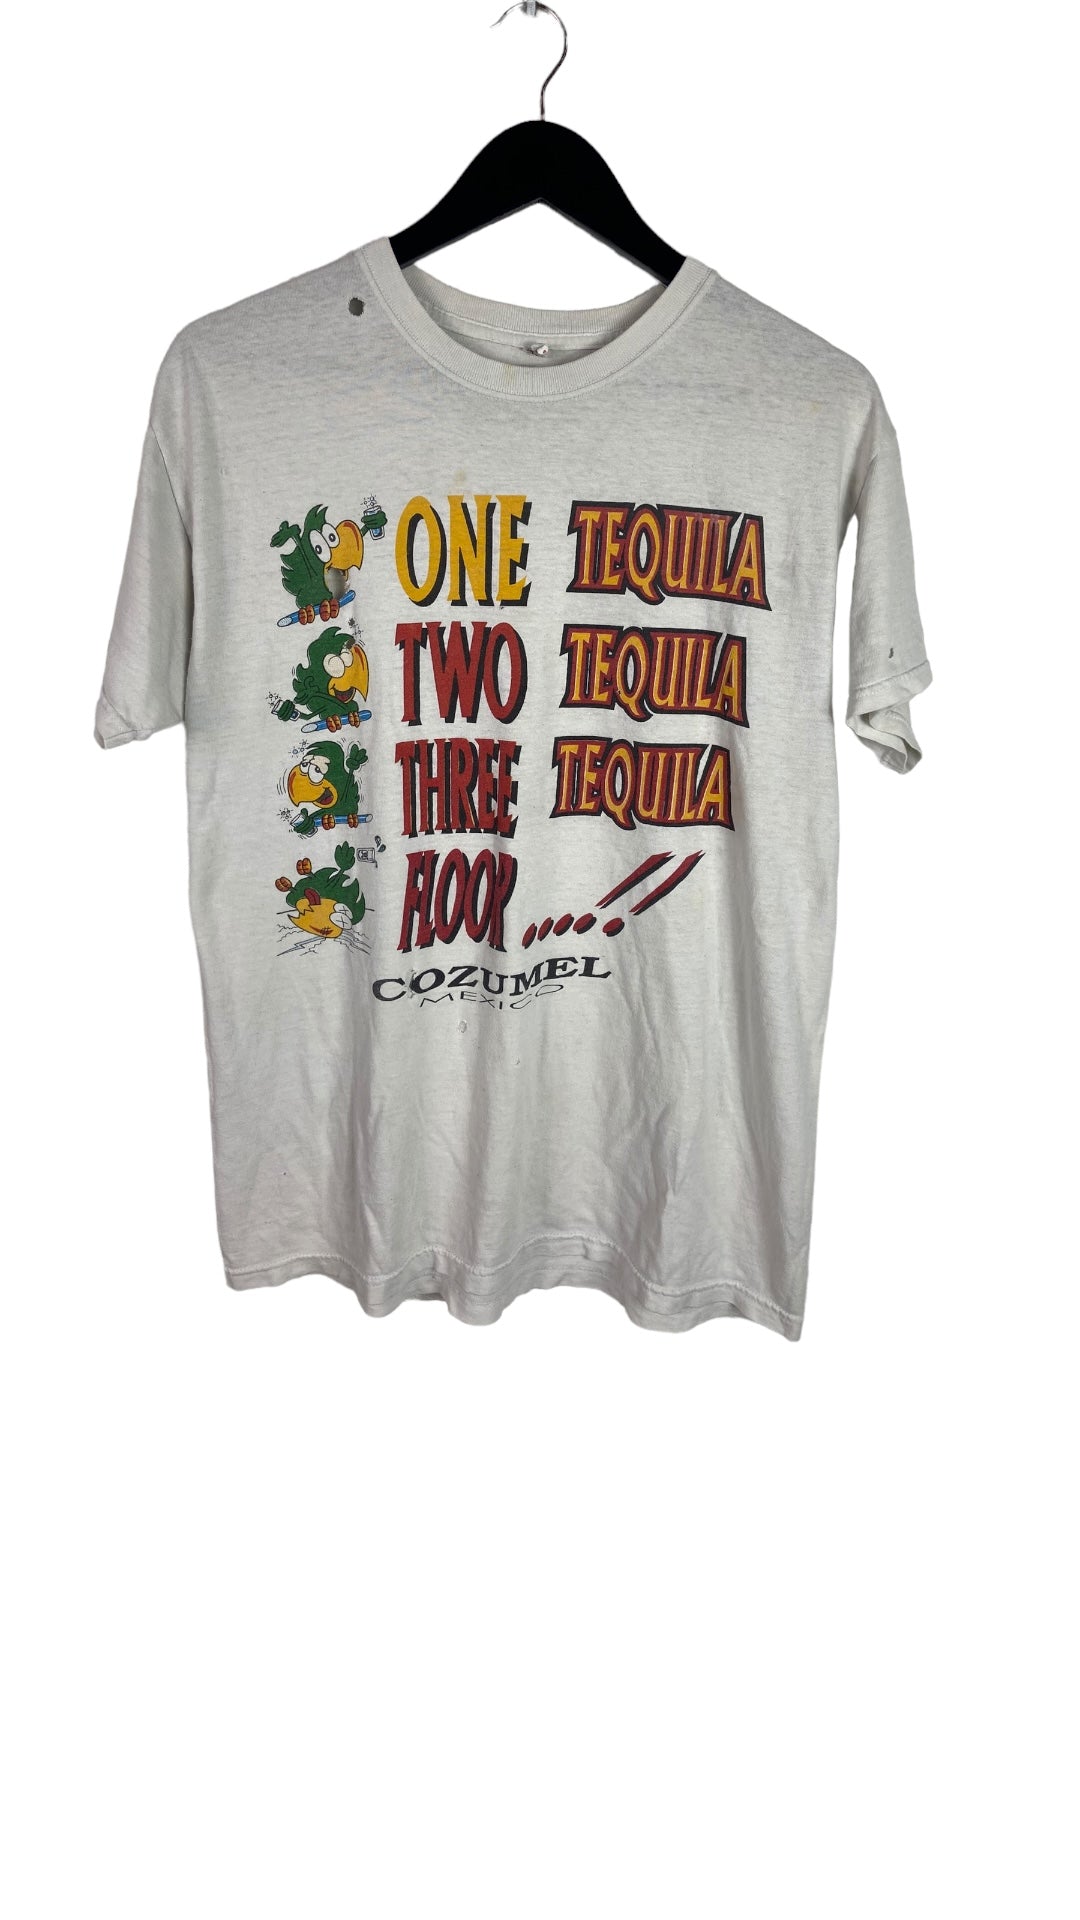 VTG One Tequila, Two Tequila, Cozumel Mexico Tee Sz L